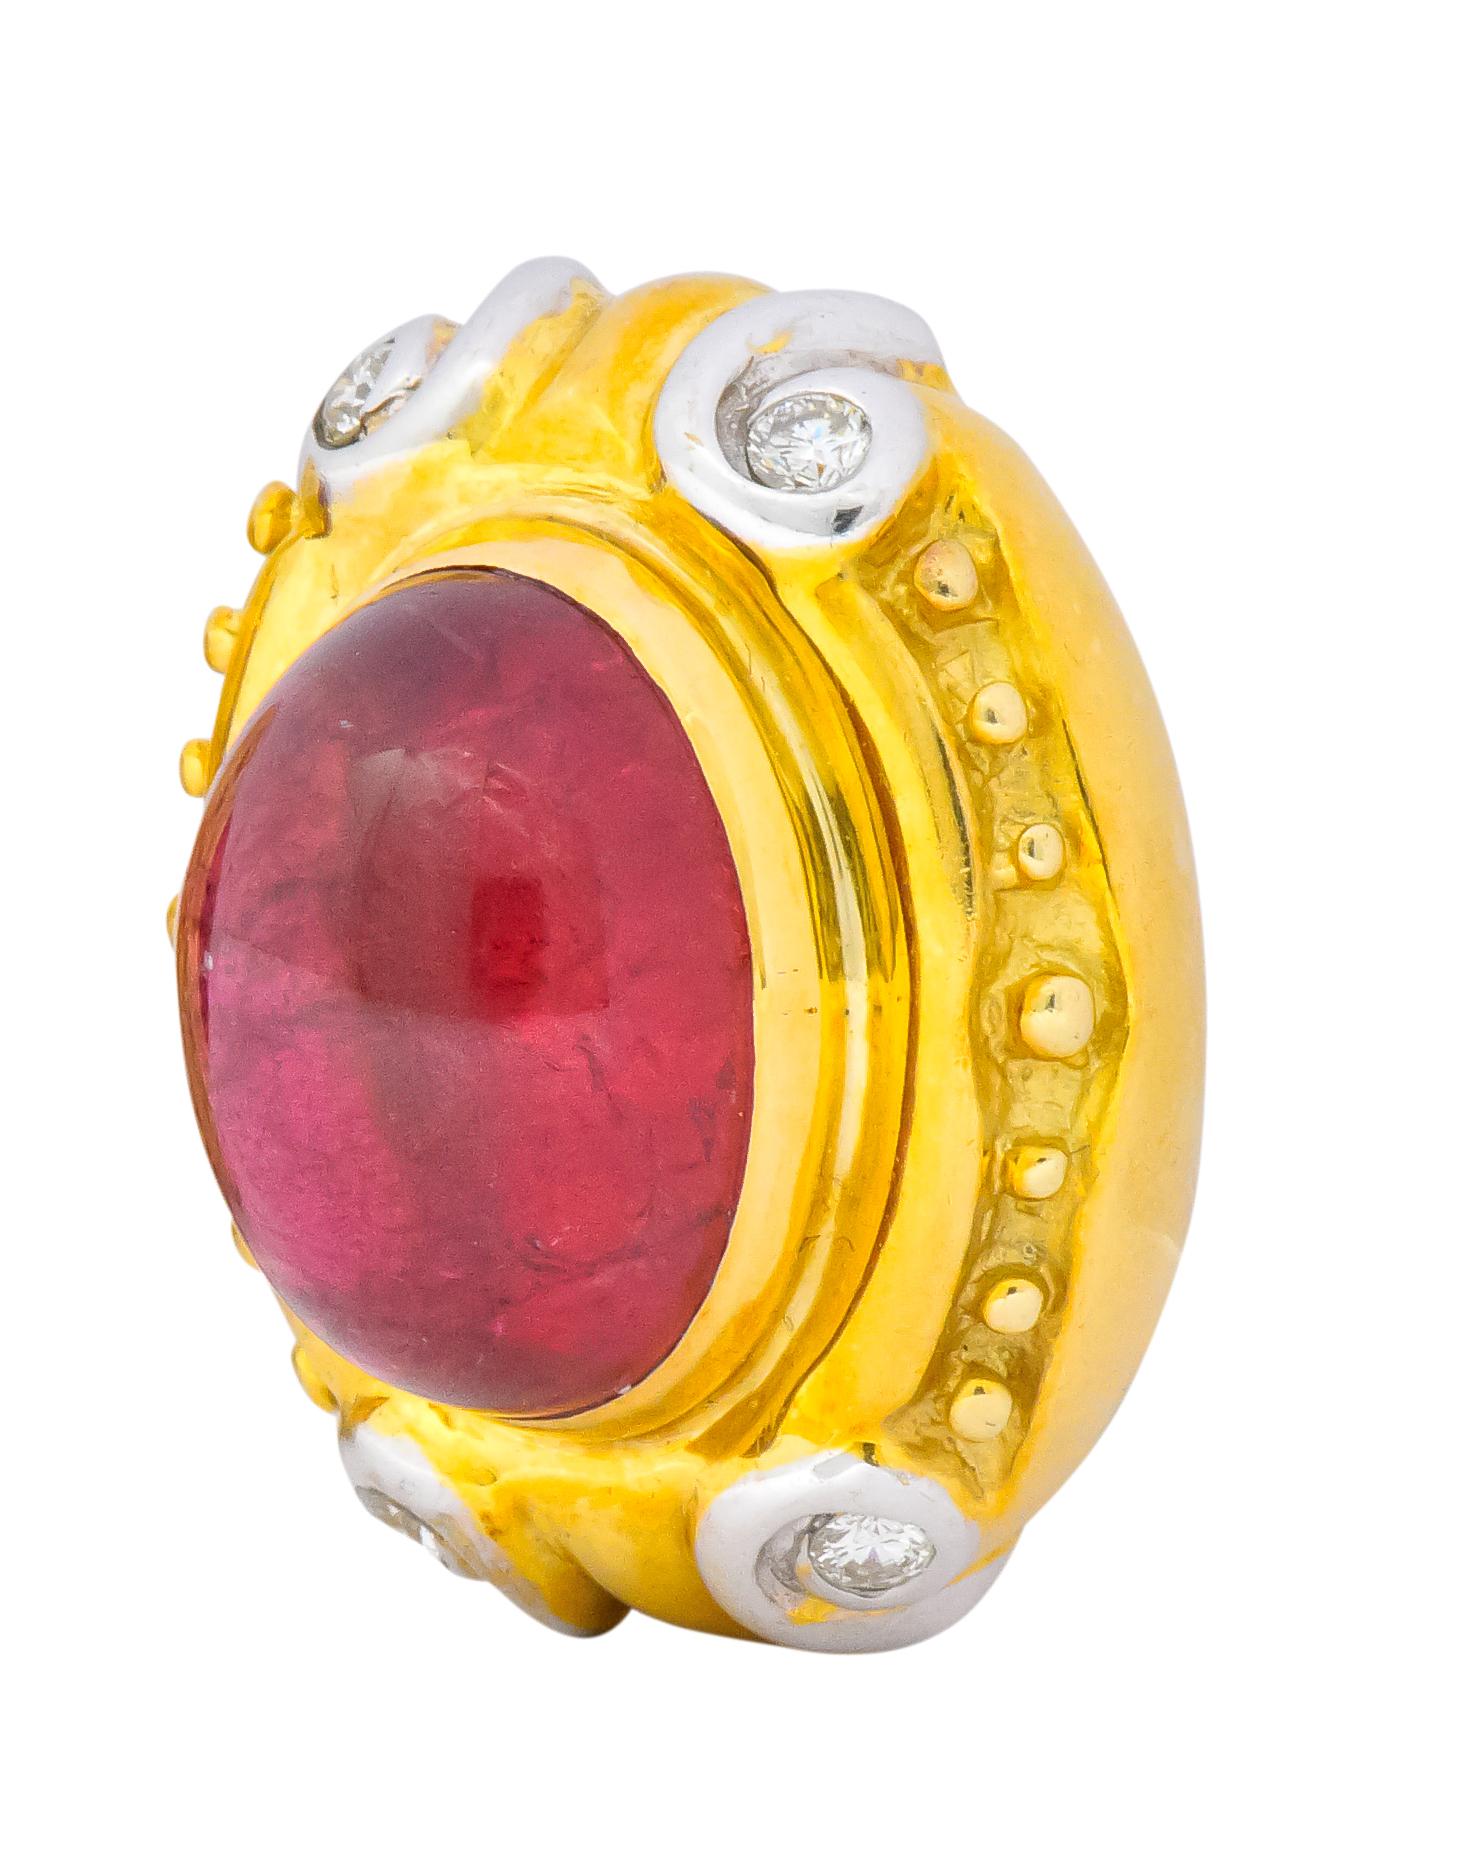 Each centering an oval cabochon pink tourmaline measuring approximately 16.0 x 12.0 mm, bright deep bubblegum pink and very well matched

Accented with round brilliant cut diamonds, weighing approximately 0.40 carat total, I/J color and VS to SI